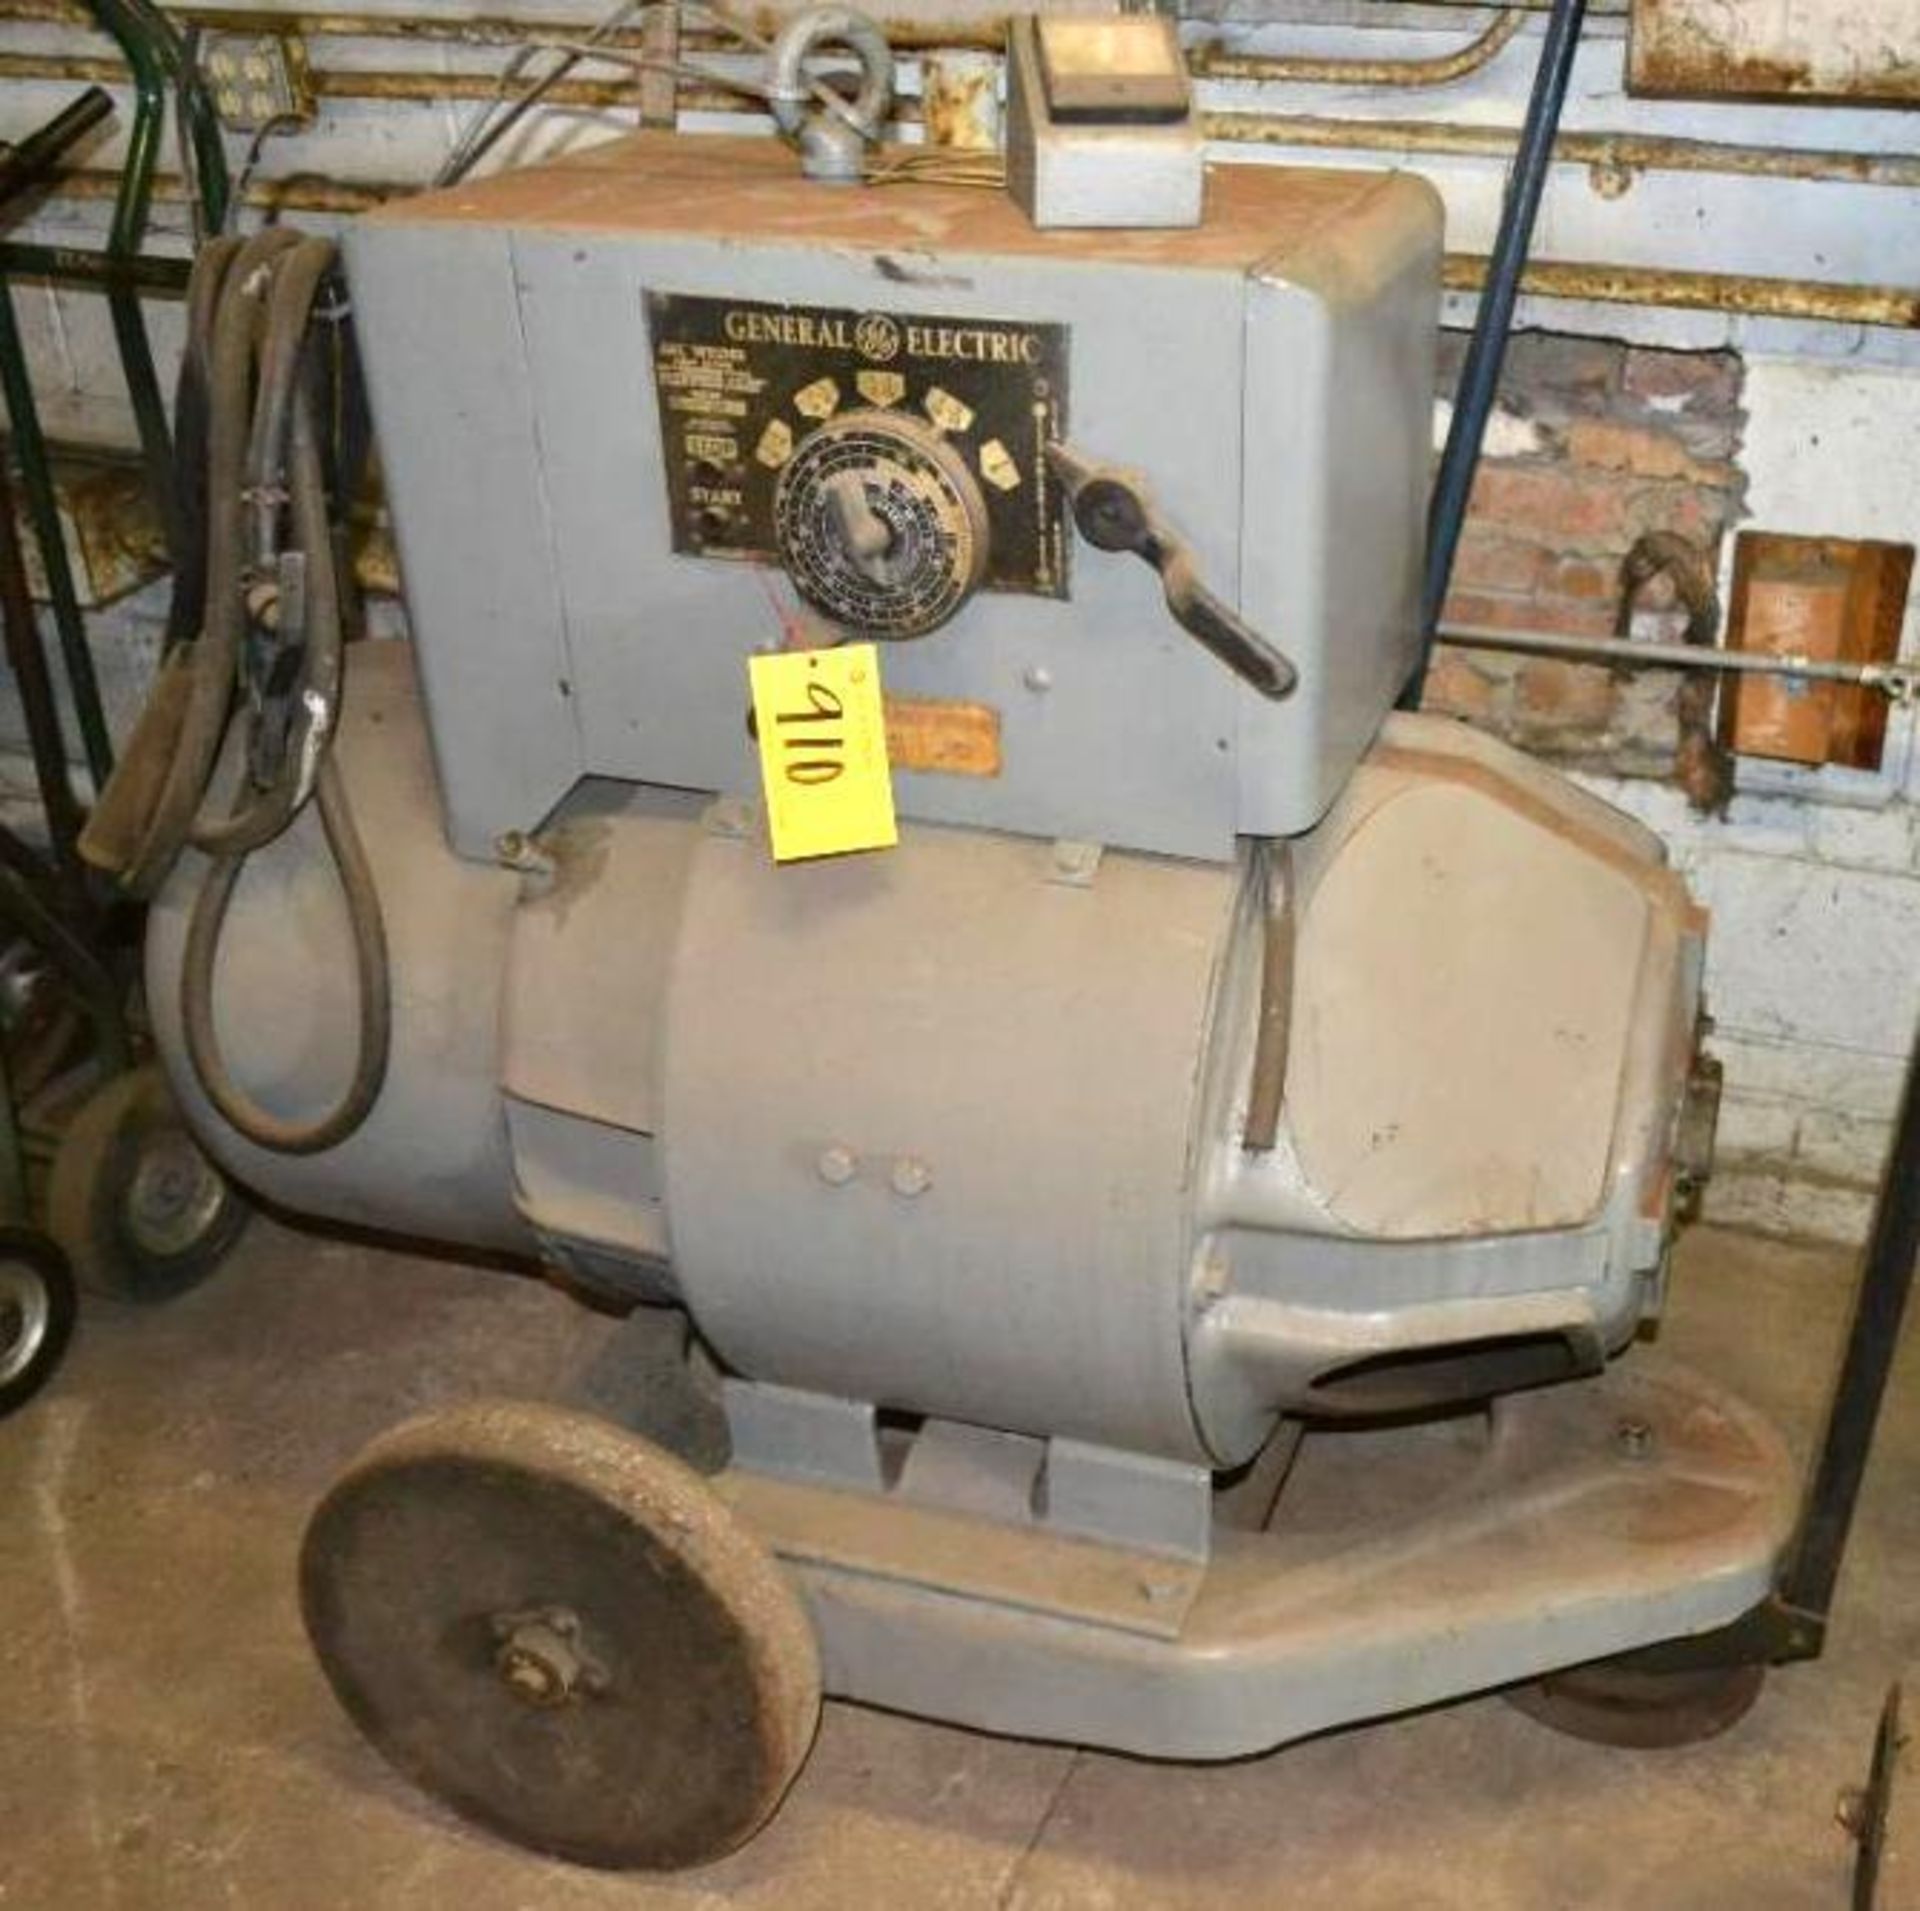 General Electric 400-AMP MG Portable Arc Welder